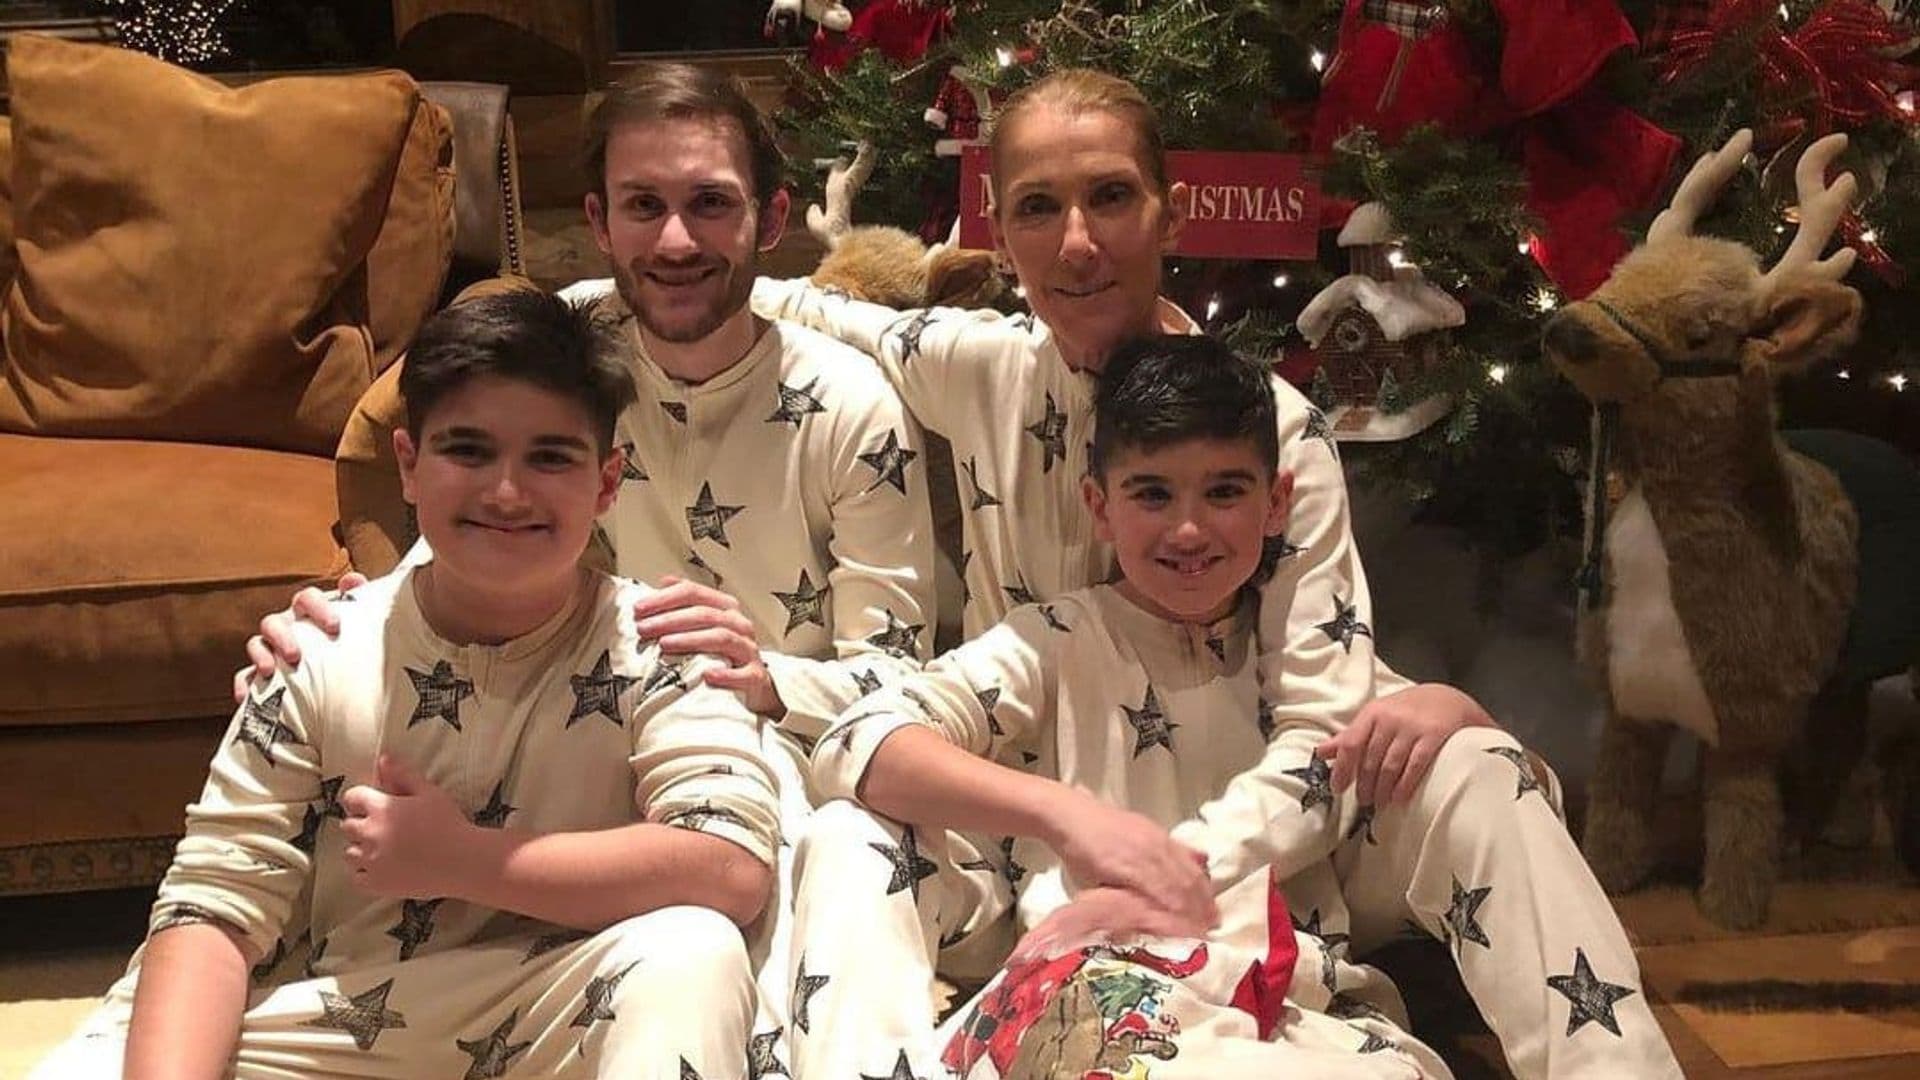 Celine Dion posts a family photo in matching Christmas pajamas